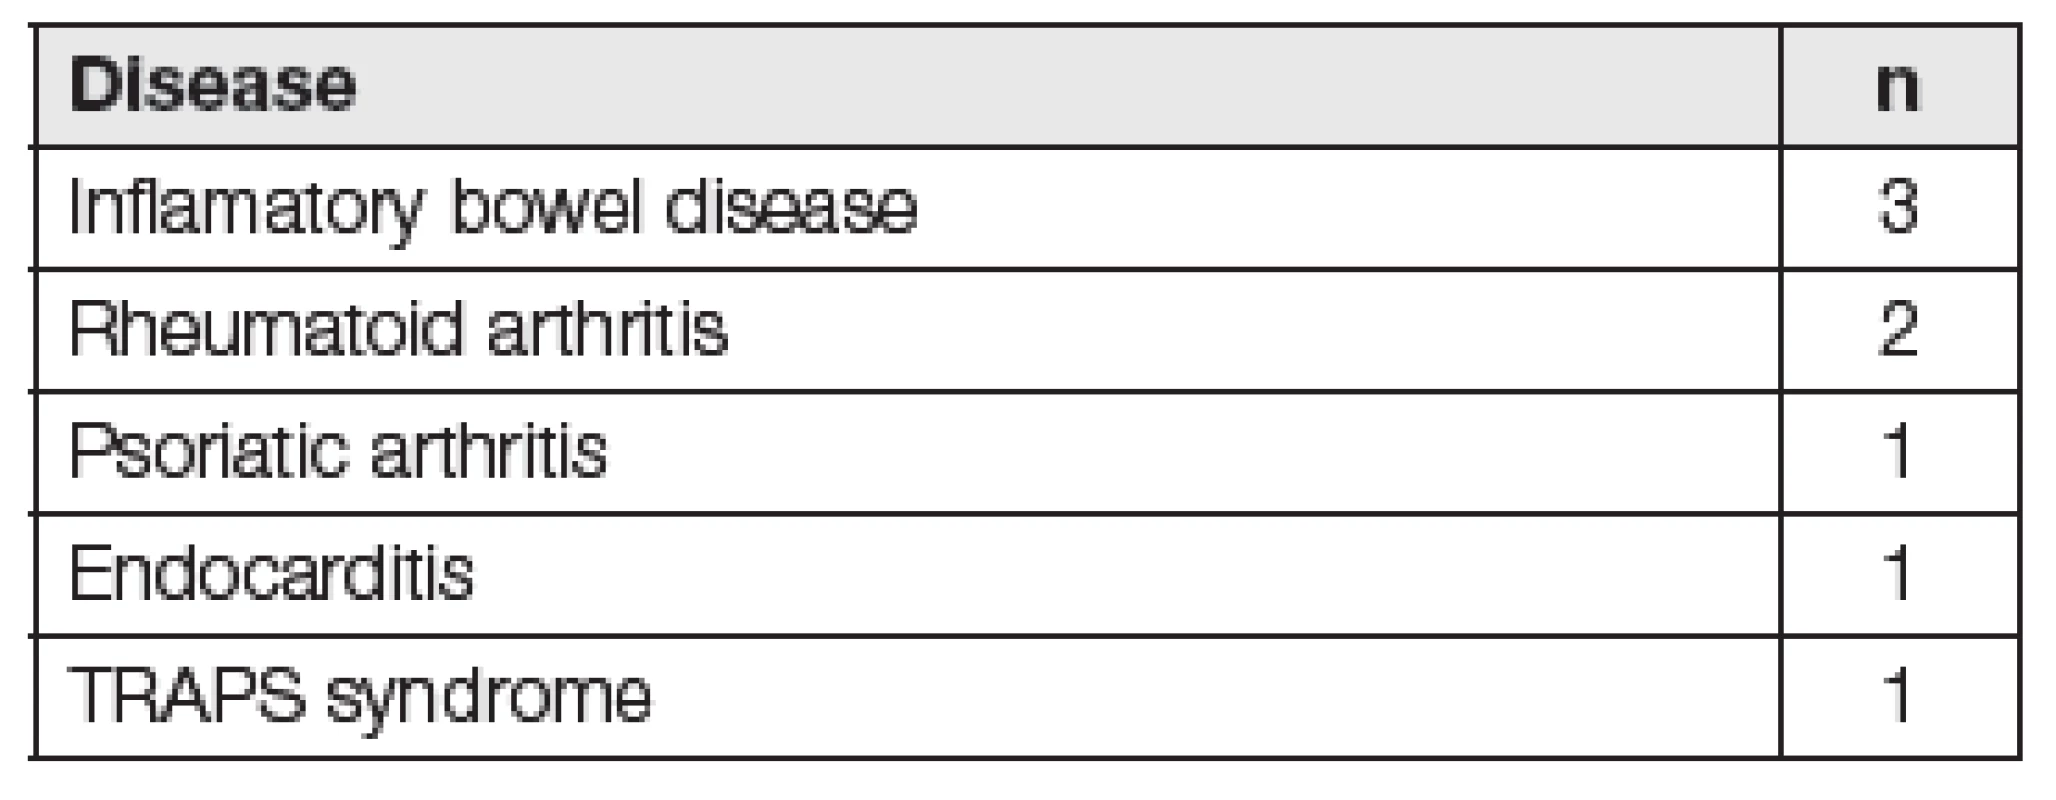 Underlying disease in 8 patients with AA amyloidosis from our department